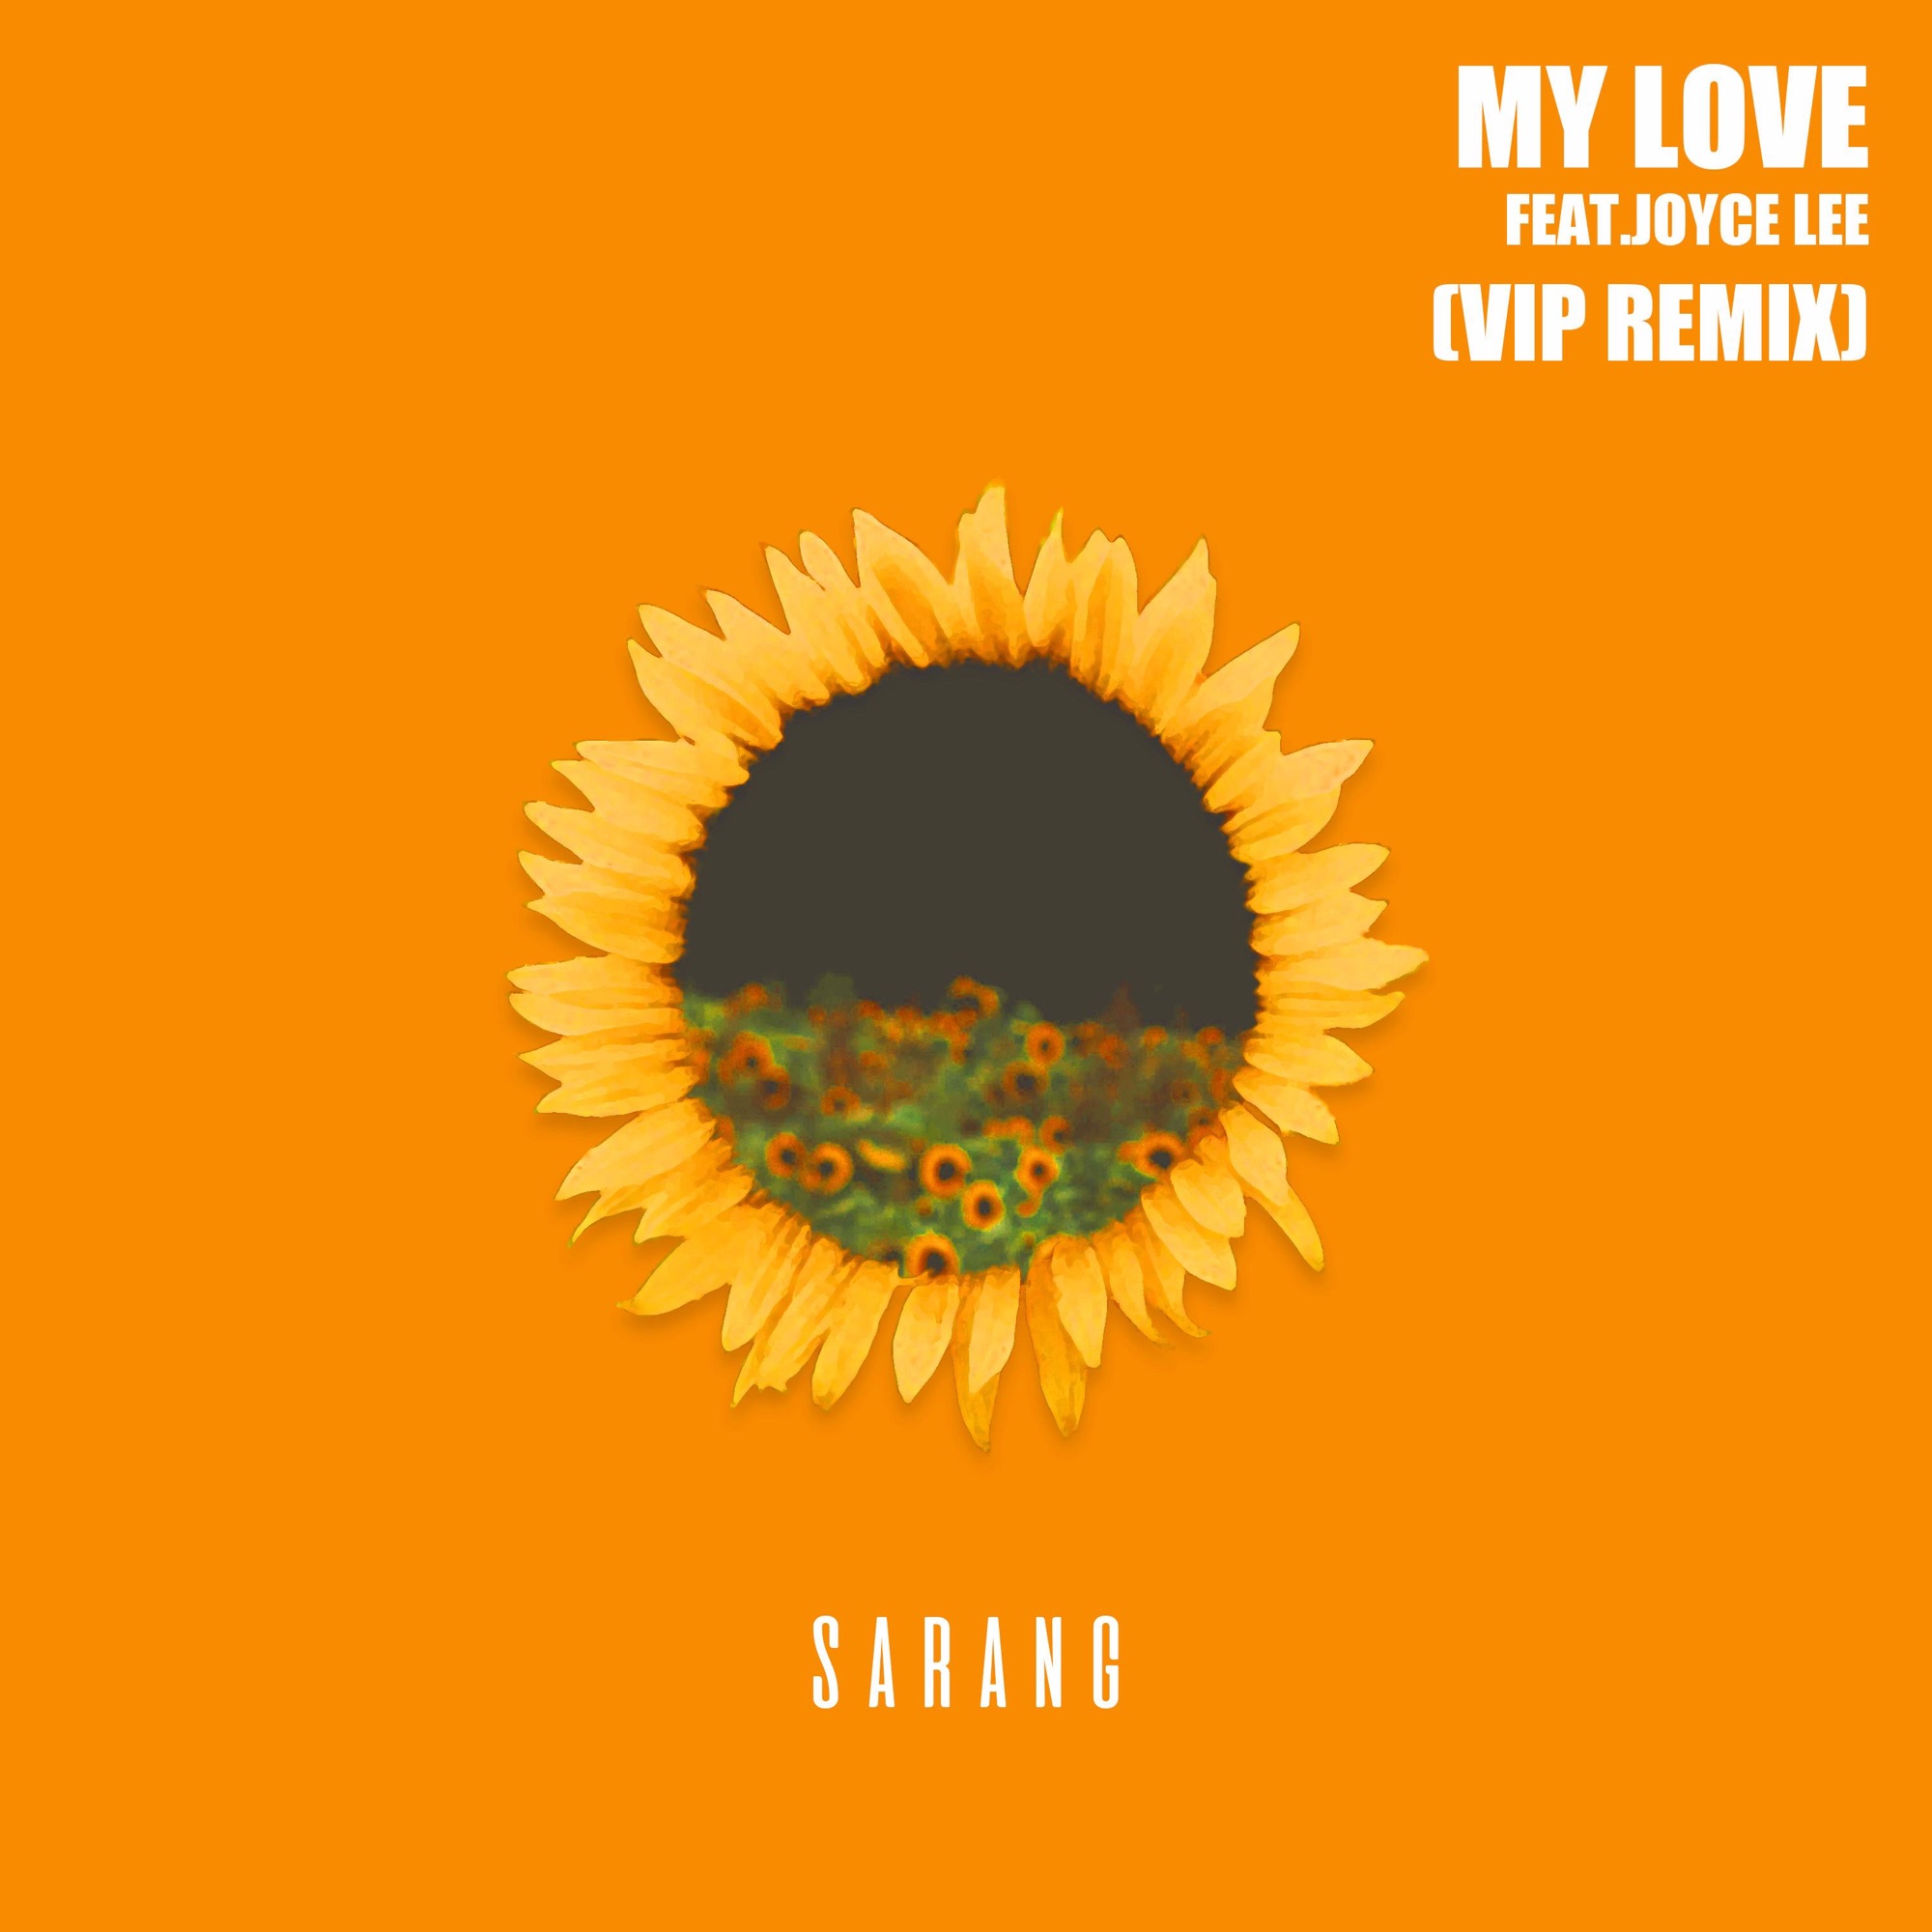 Art for My Love (feat. Joyce Lee) [VIP Remix] by Sarang